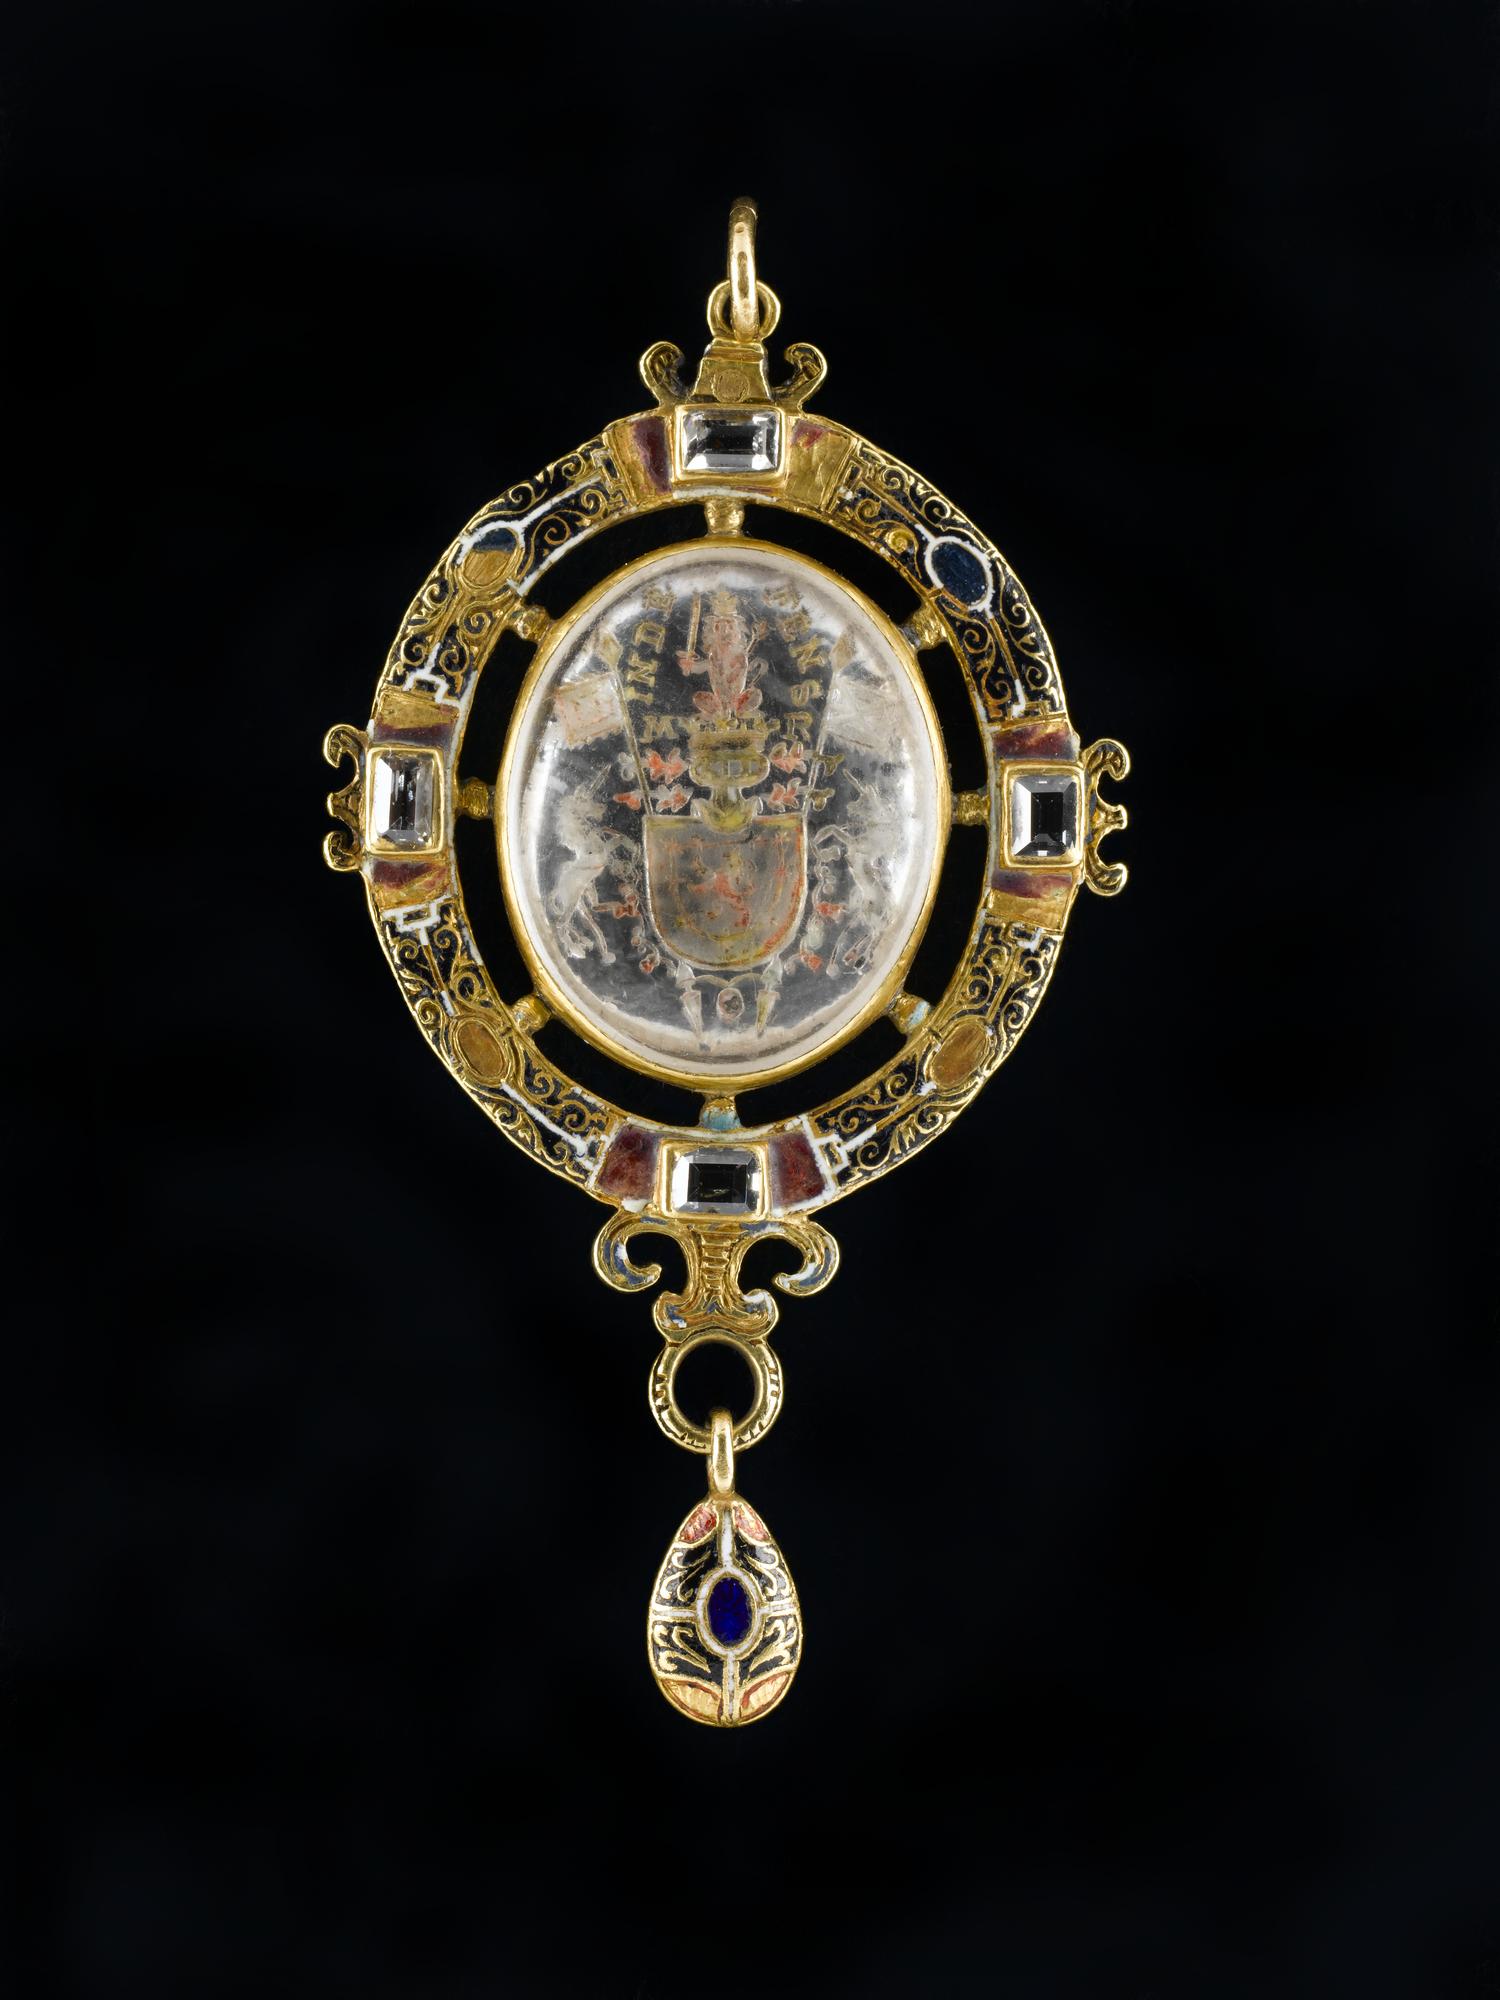 Renaissance gold pendant engraved with the arms of Mary, Queen of Scots, set within a crystal in colours, probably made by a French goldsmith, 1548 - 1558.